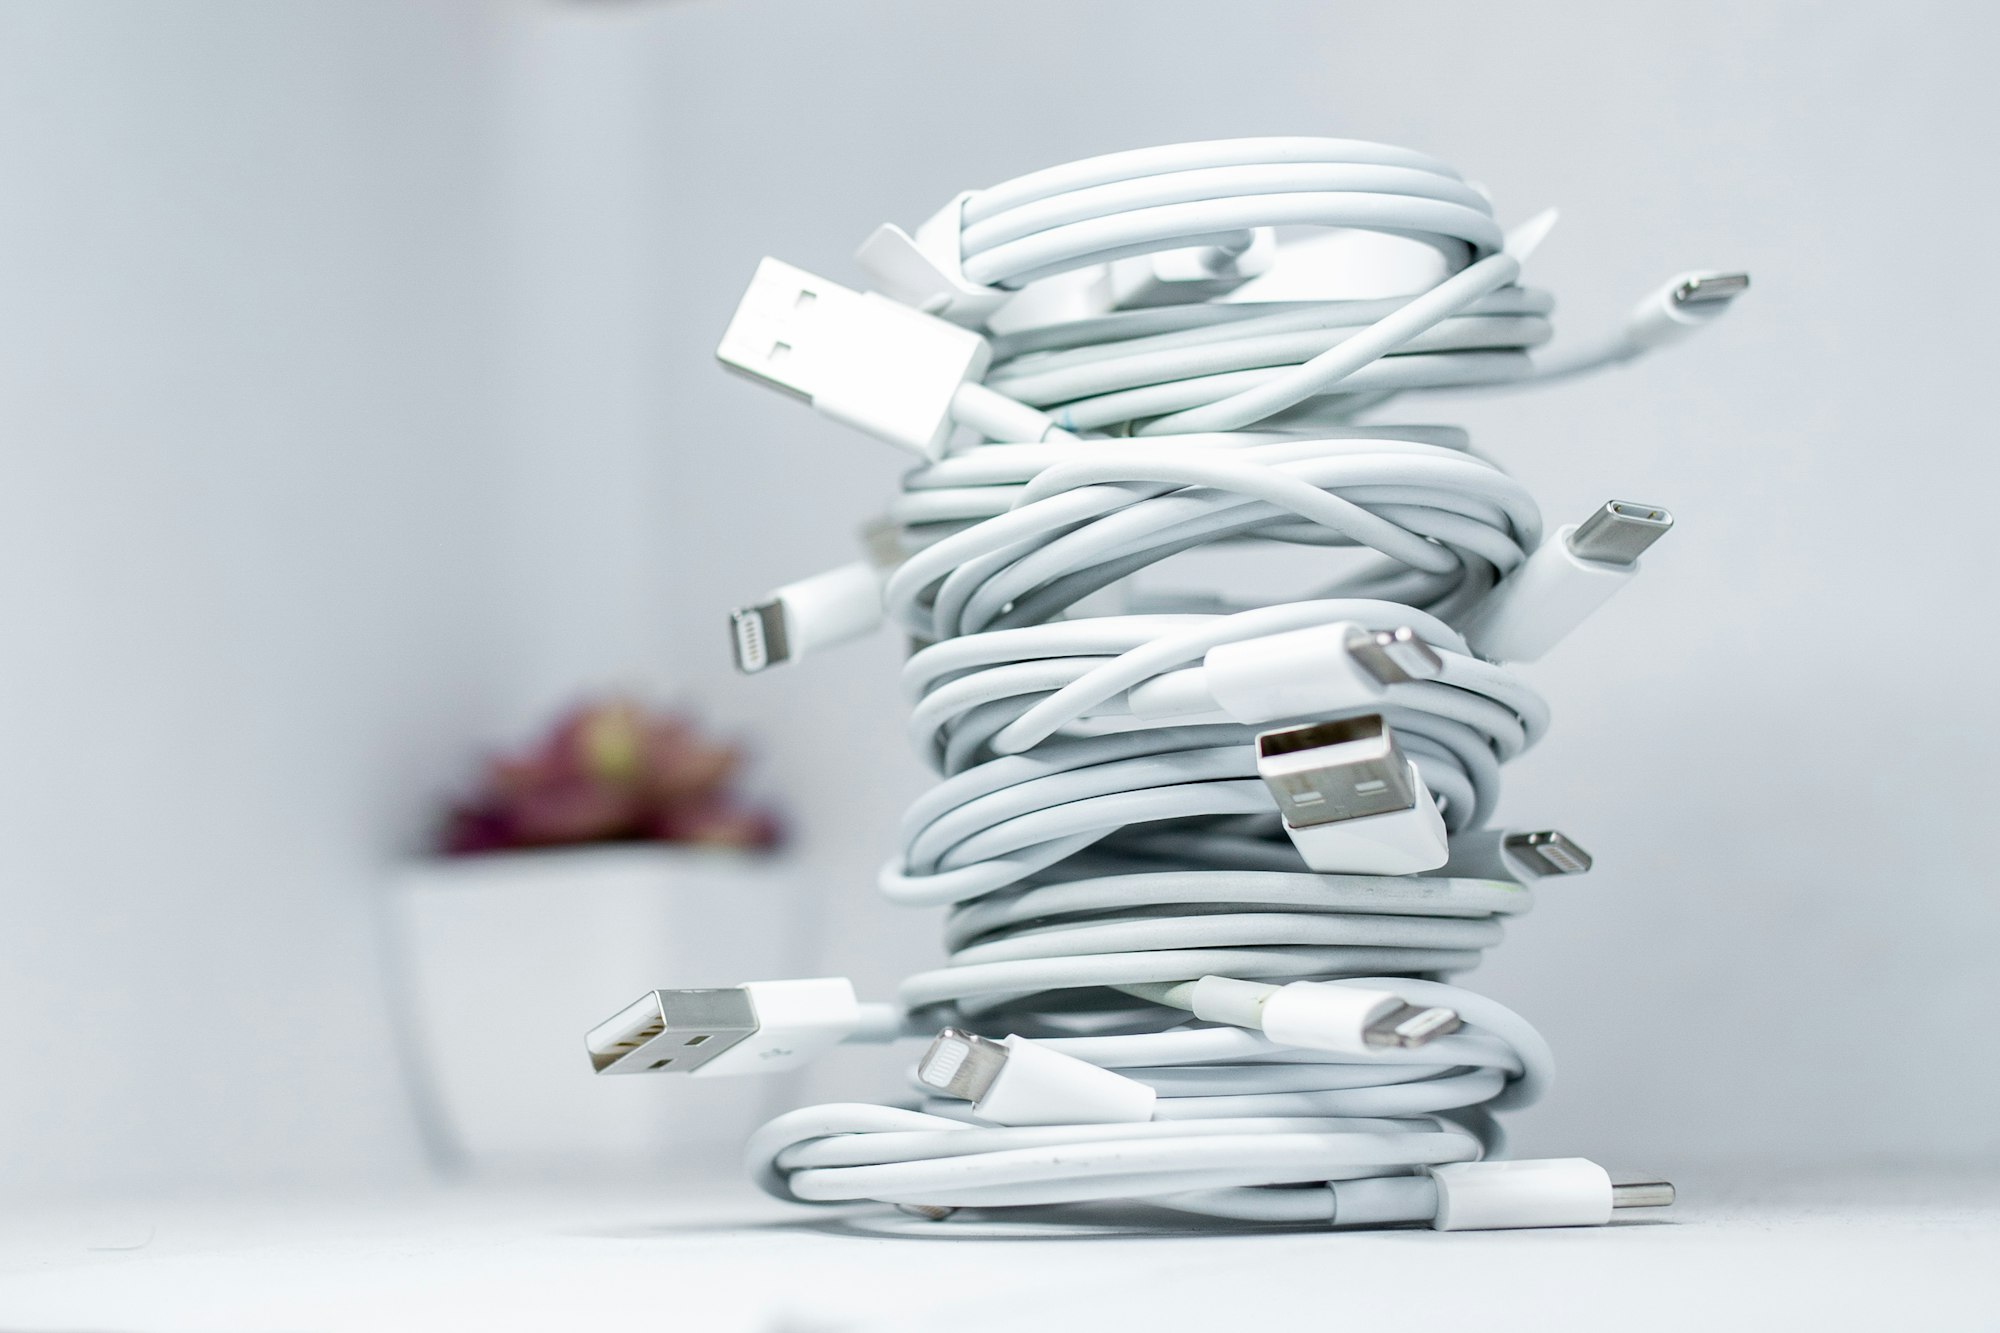 Apple iPhone and iPad charging cables